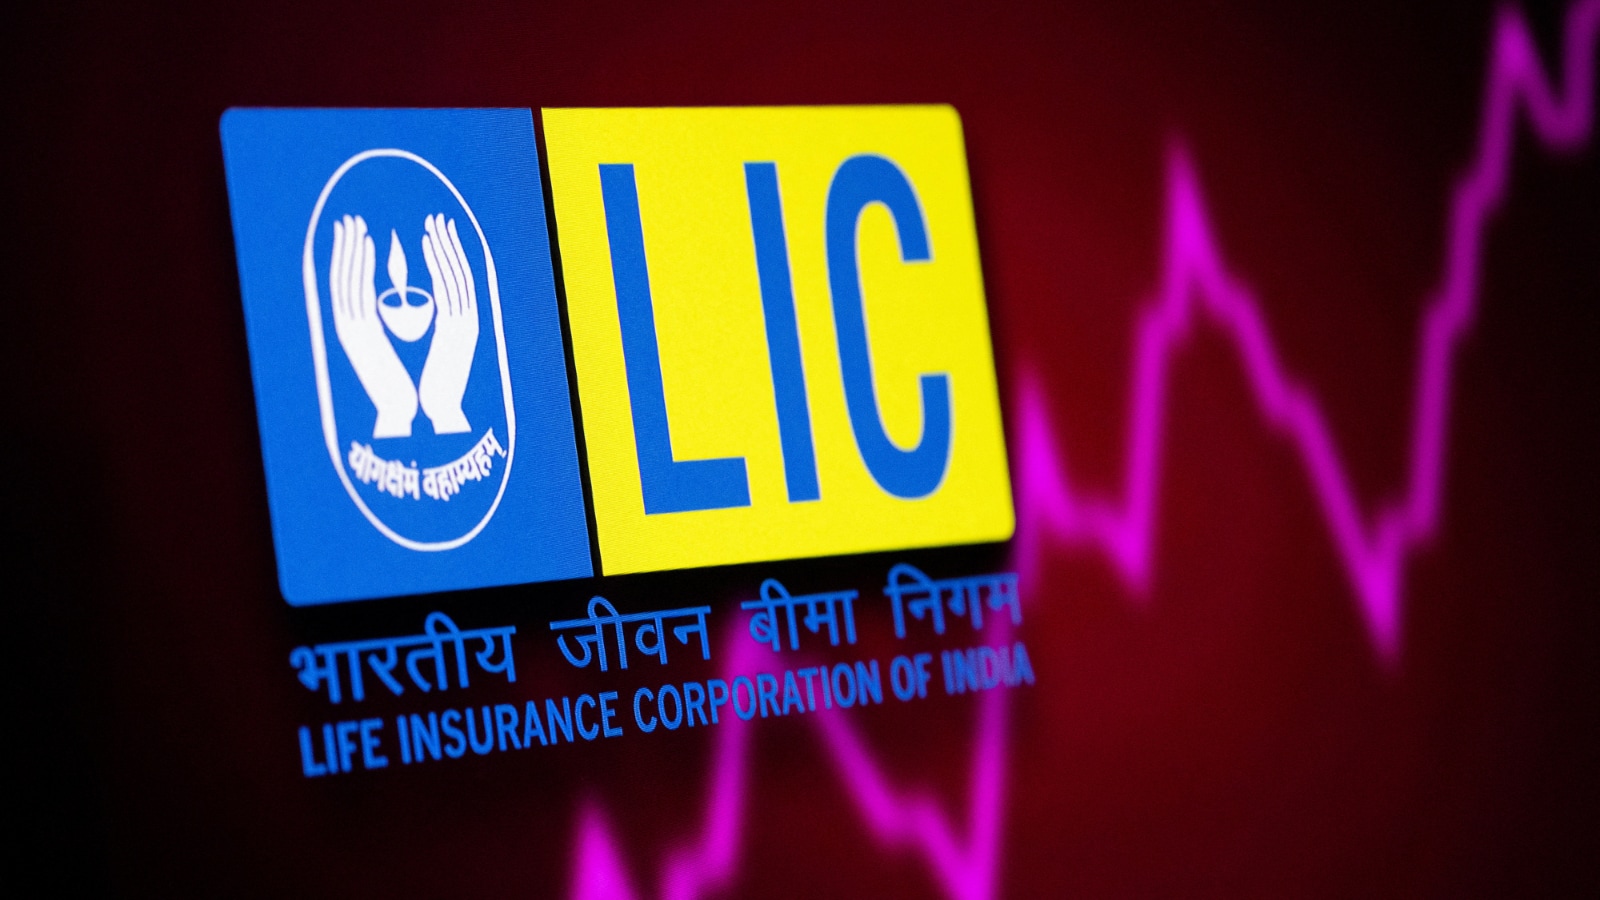 Mini Ipe takes charge as MD of LIC